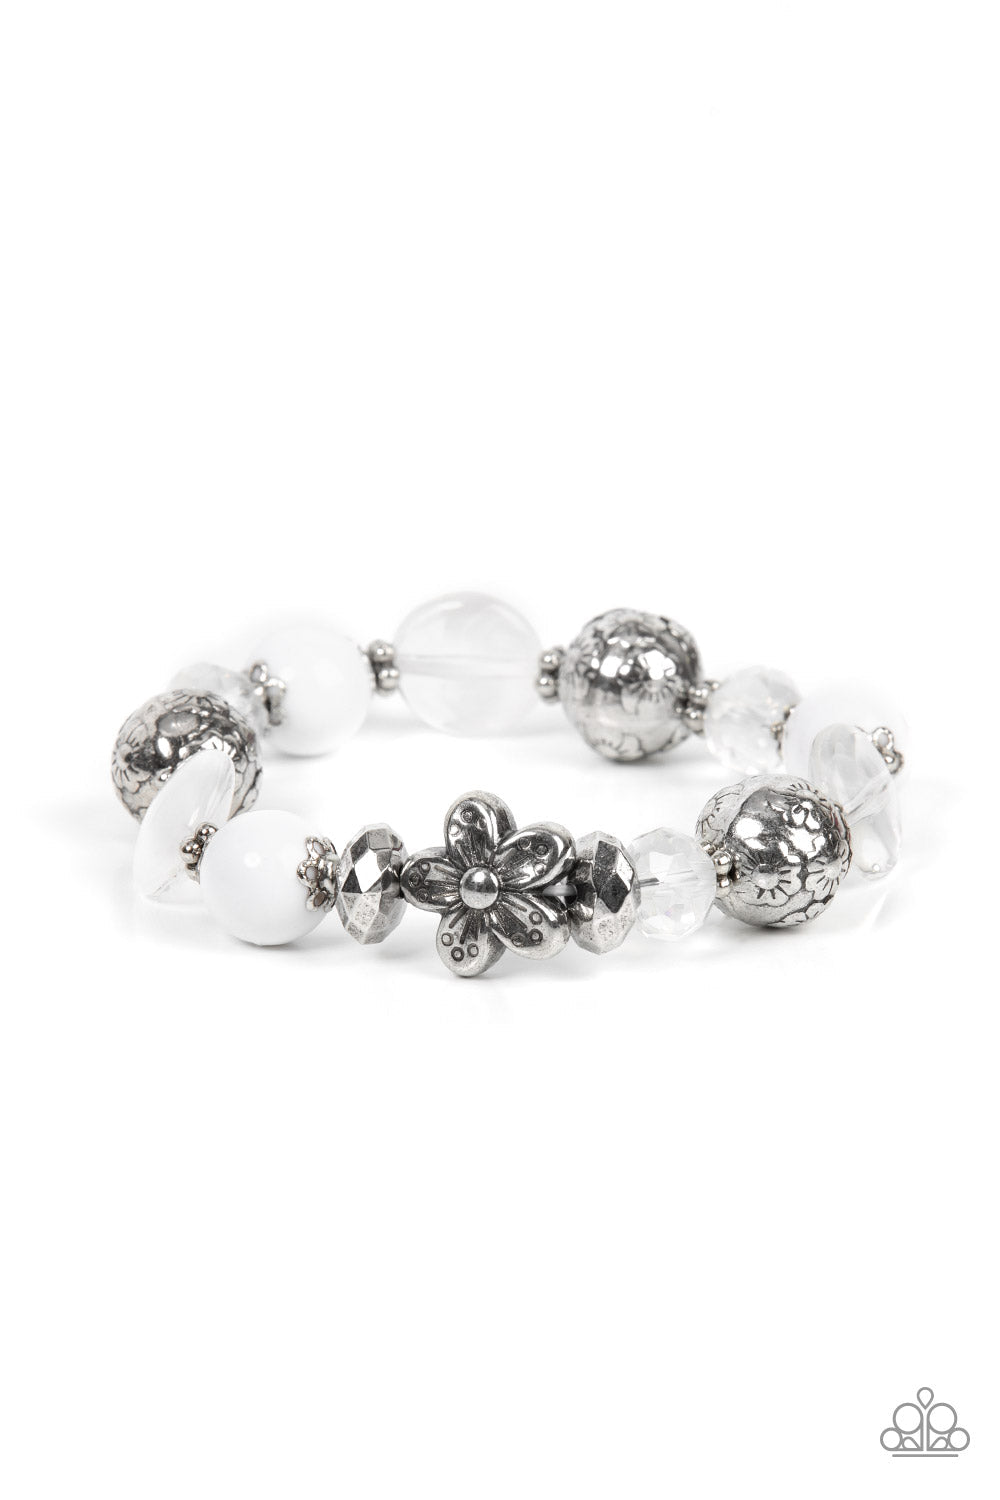 Pretty Persuasion - Iridescent White and Silver - Stretchy Bracelet - Paparazzi Accessories - Enchanting assortment of silver floral beads and studded silver rings join an opaque, glassy, and iridescent assortment of white beads along a stretchy band around the wrist.